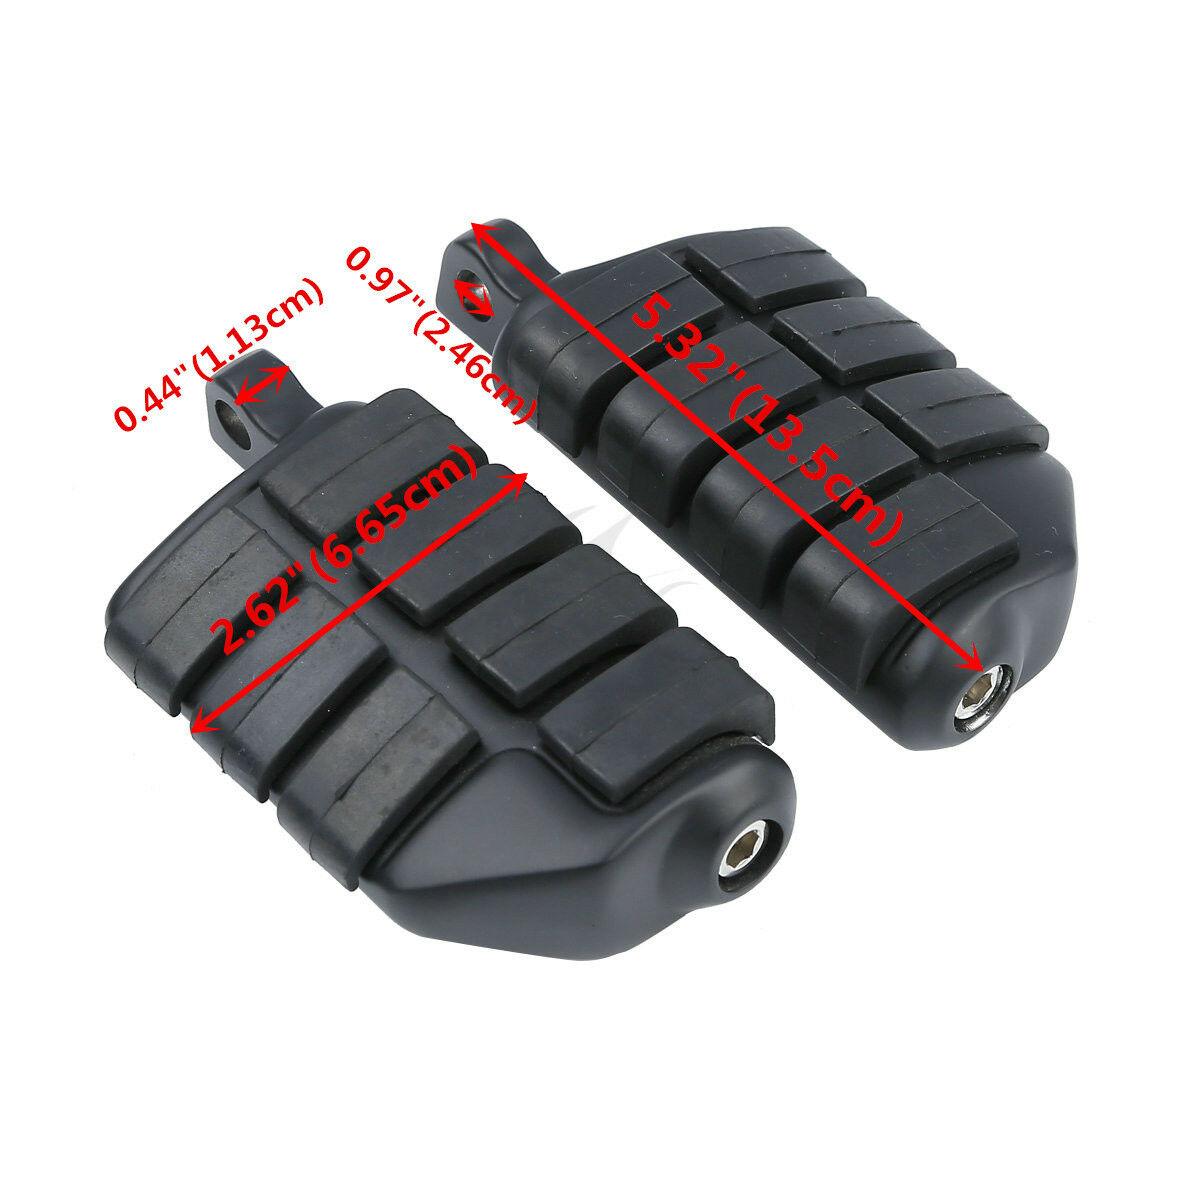 Matte Black Male Mount FootPegs Rest Fit For Harley Touring Road King Sportster - Moto Life Products